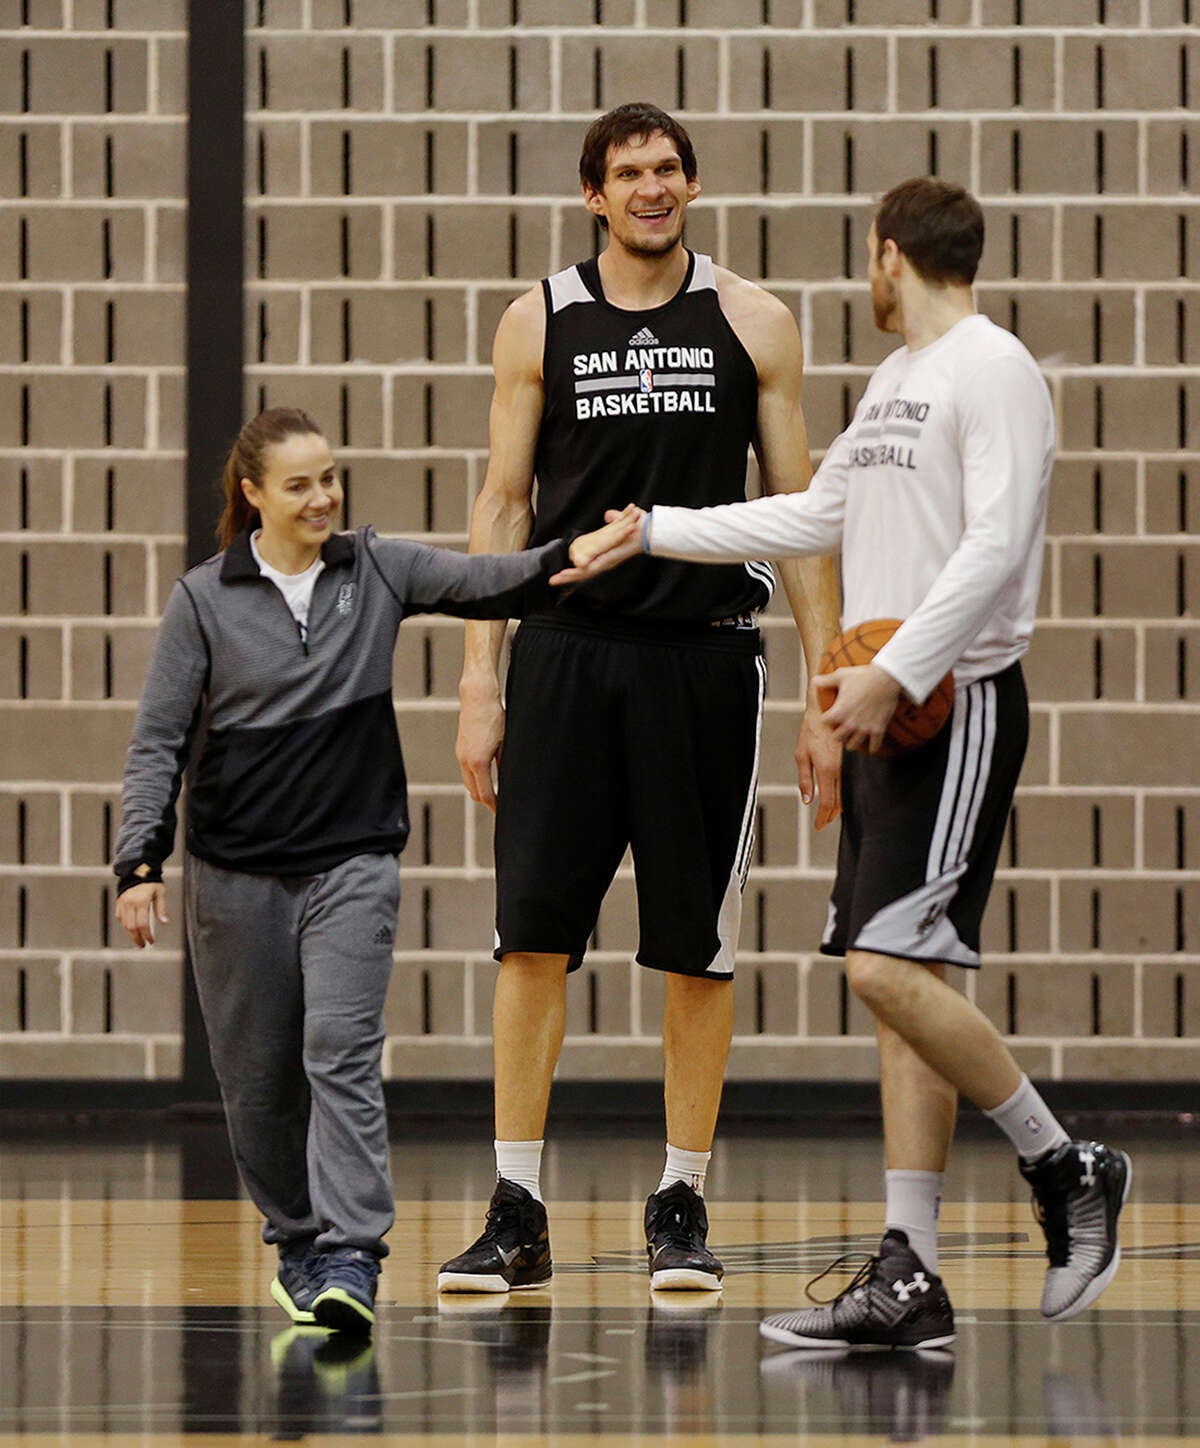 Boban Marjanovic Couldn't Go to SoulCycle Because of Size 20 Shoes